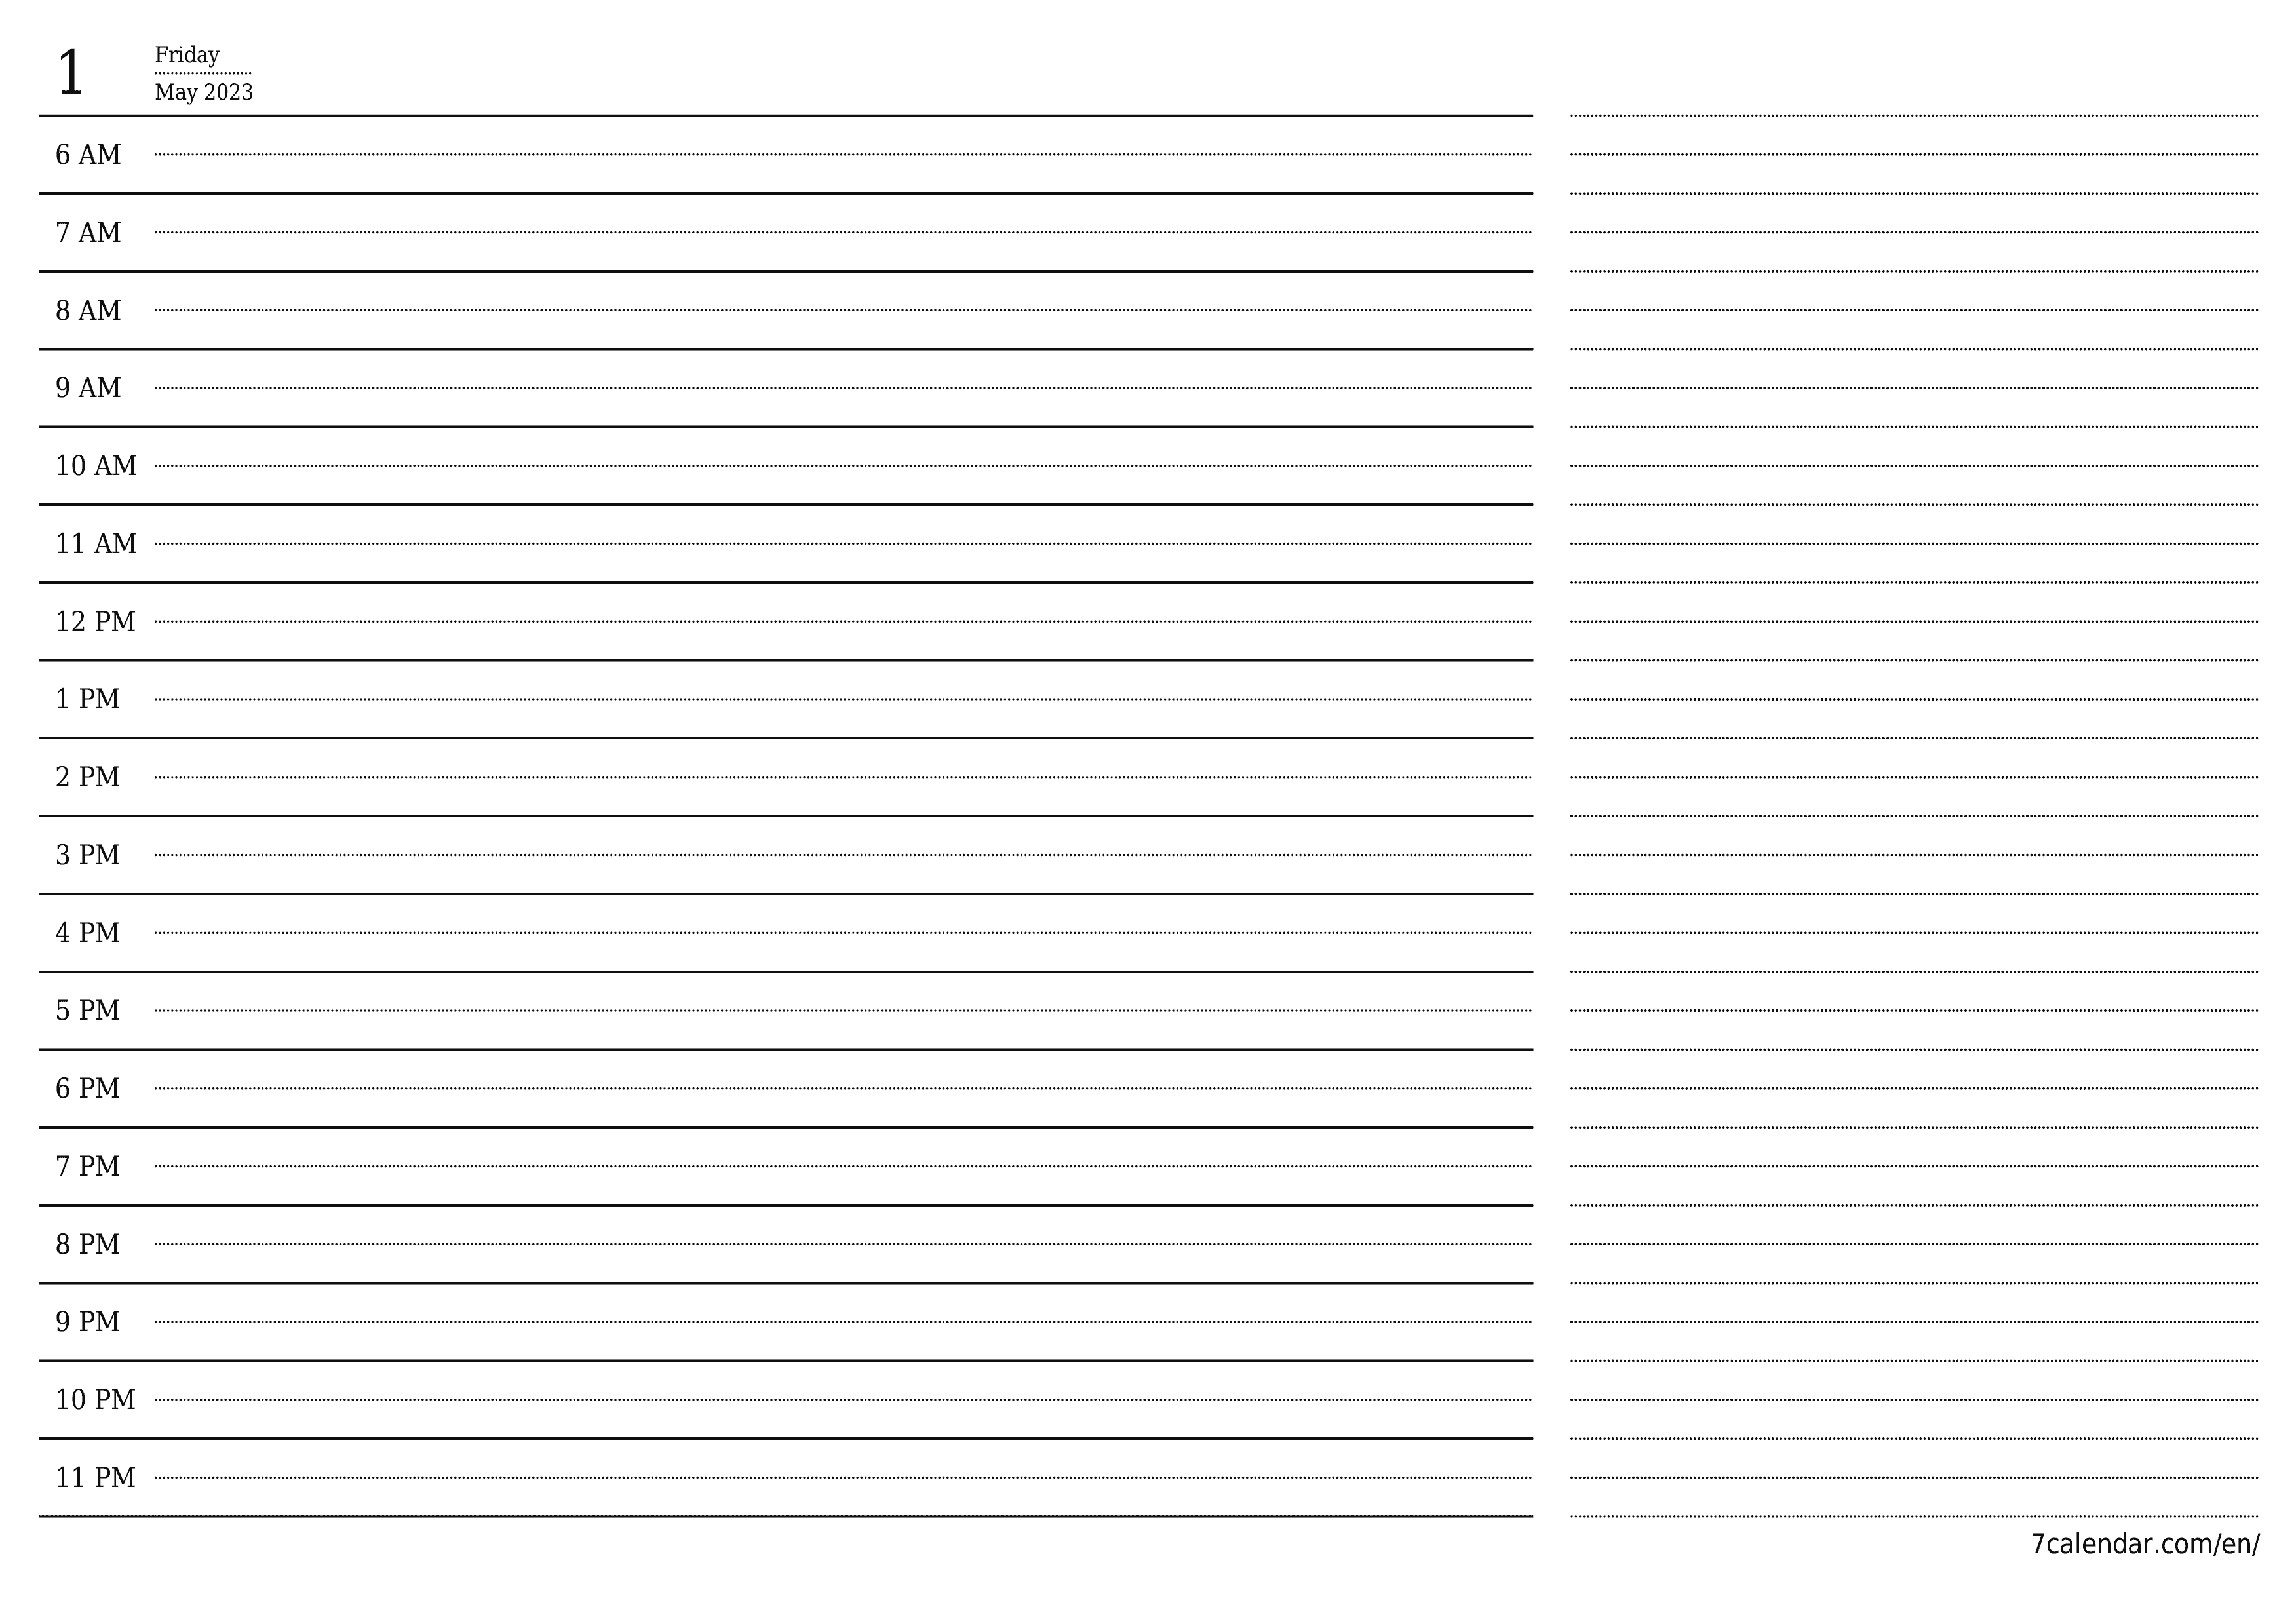 Blank daily printable calendar and planner for day May 2023 with notes, save and print to PDF PNG English - 7calendar.com